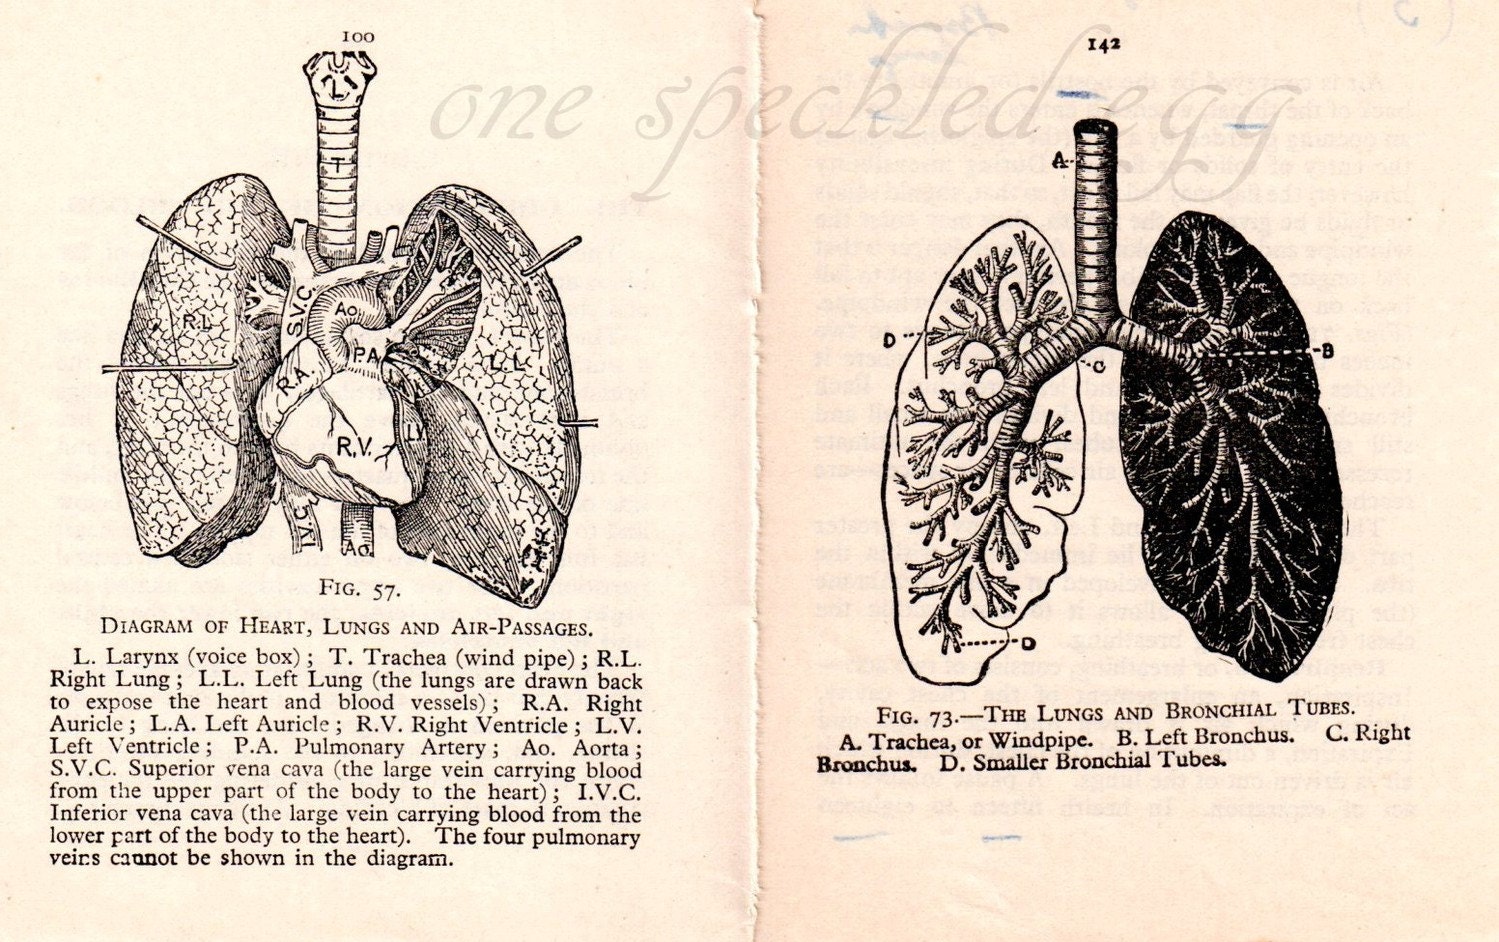 Illustrated Lungs